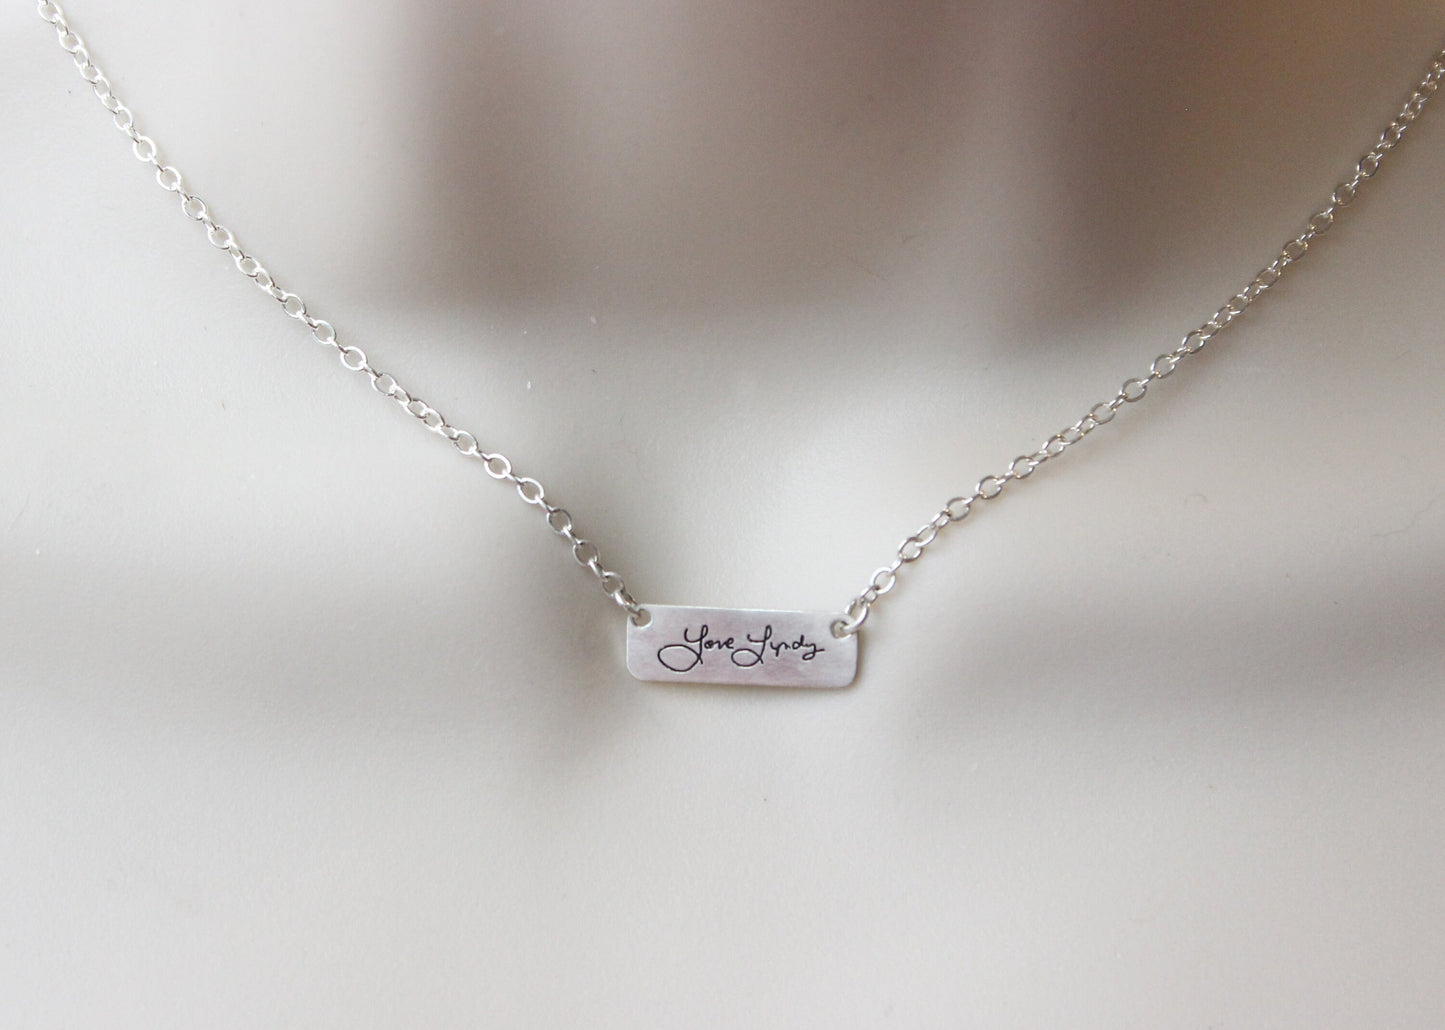 Handwriting Necklace // Sterling Silver Signature Necklace // Custom Engraved Actual Handwriting Bar Jewelry // Name Necklace